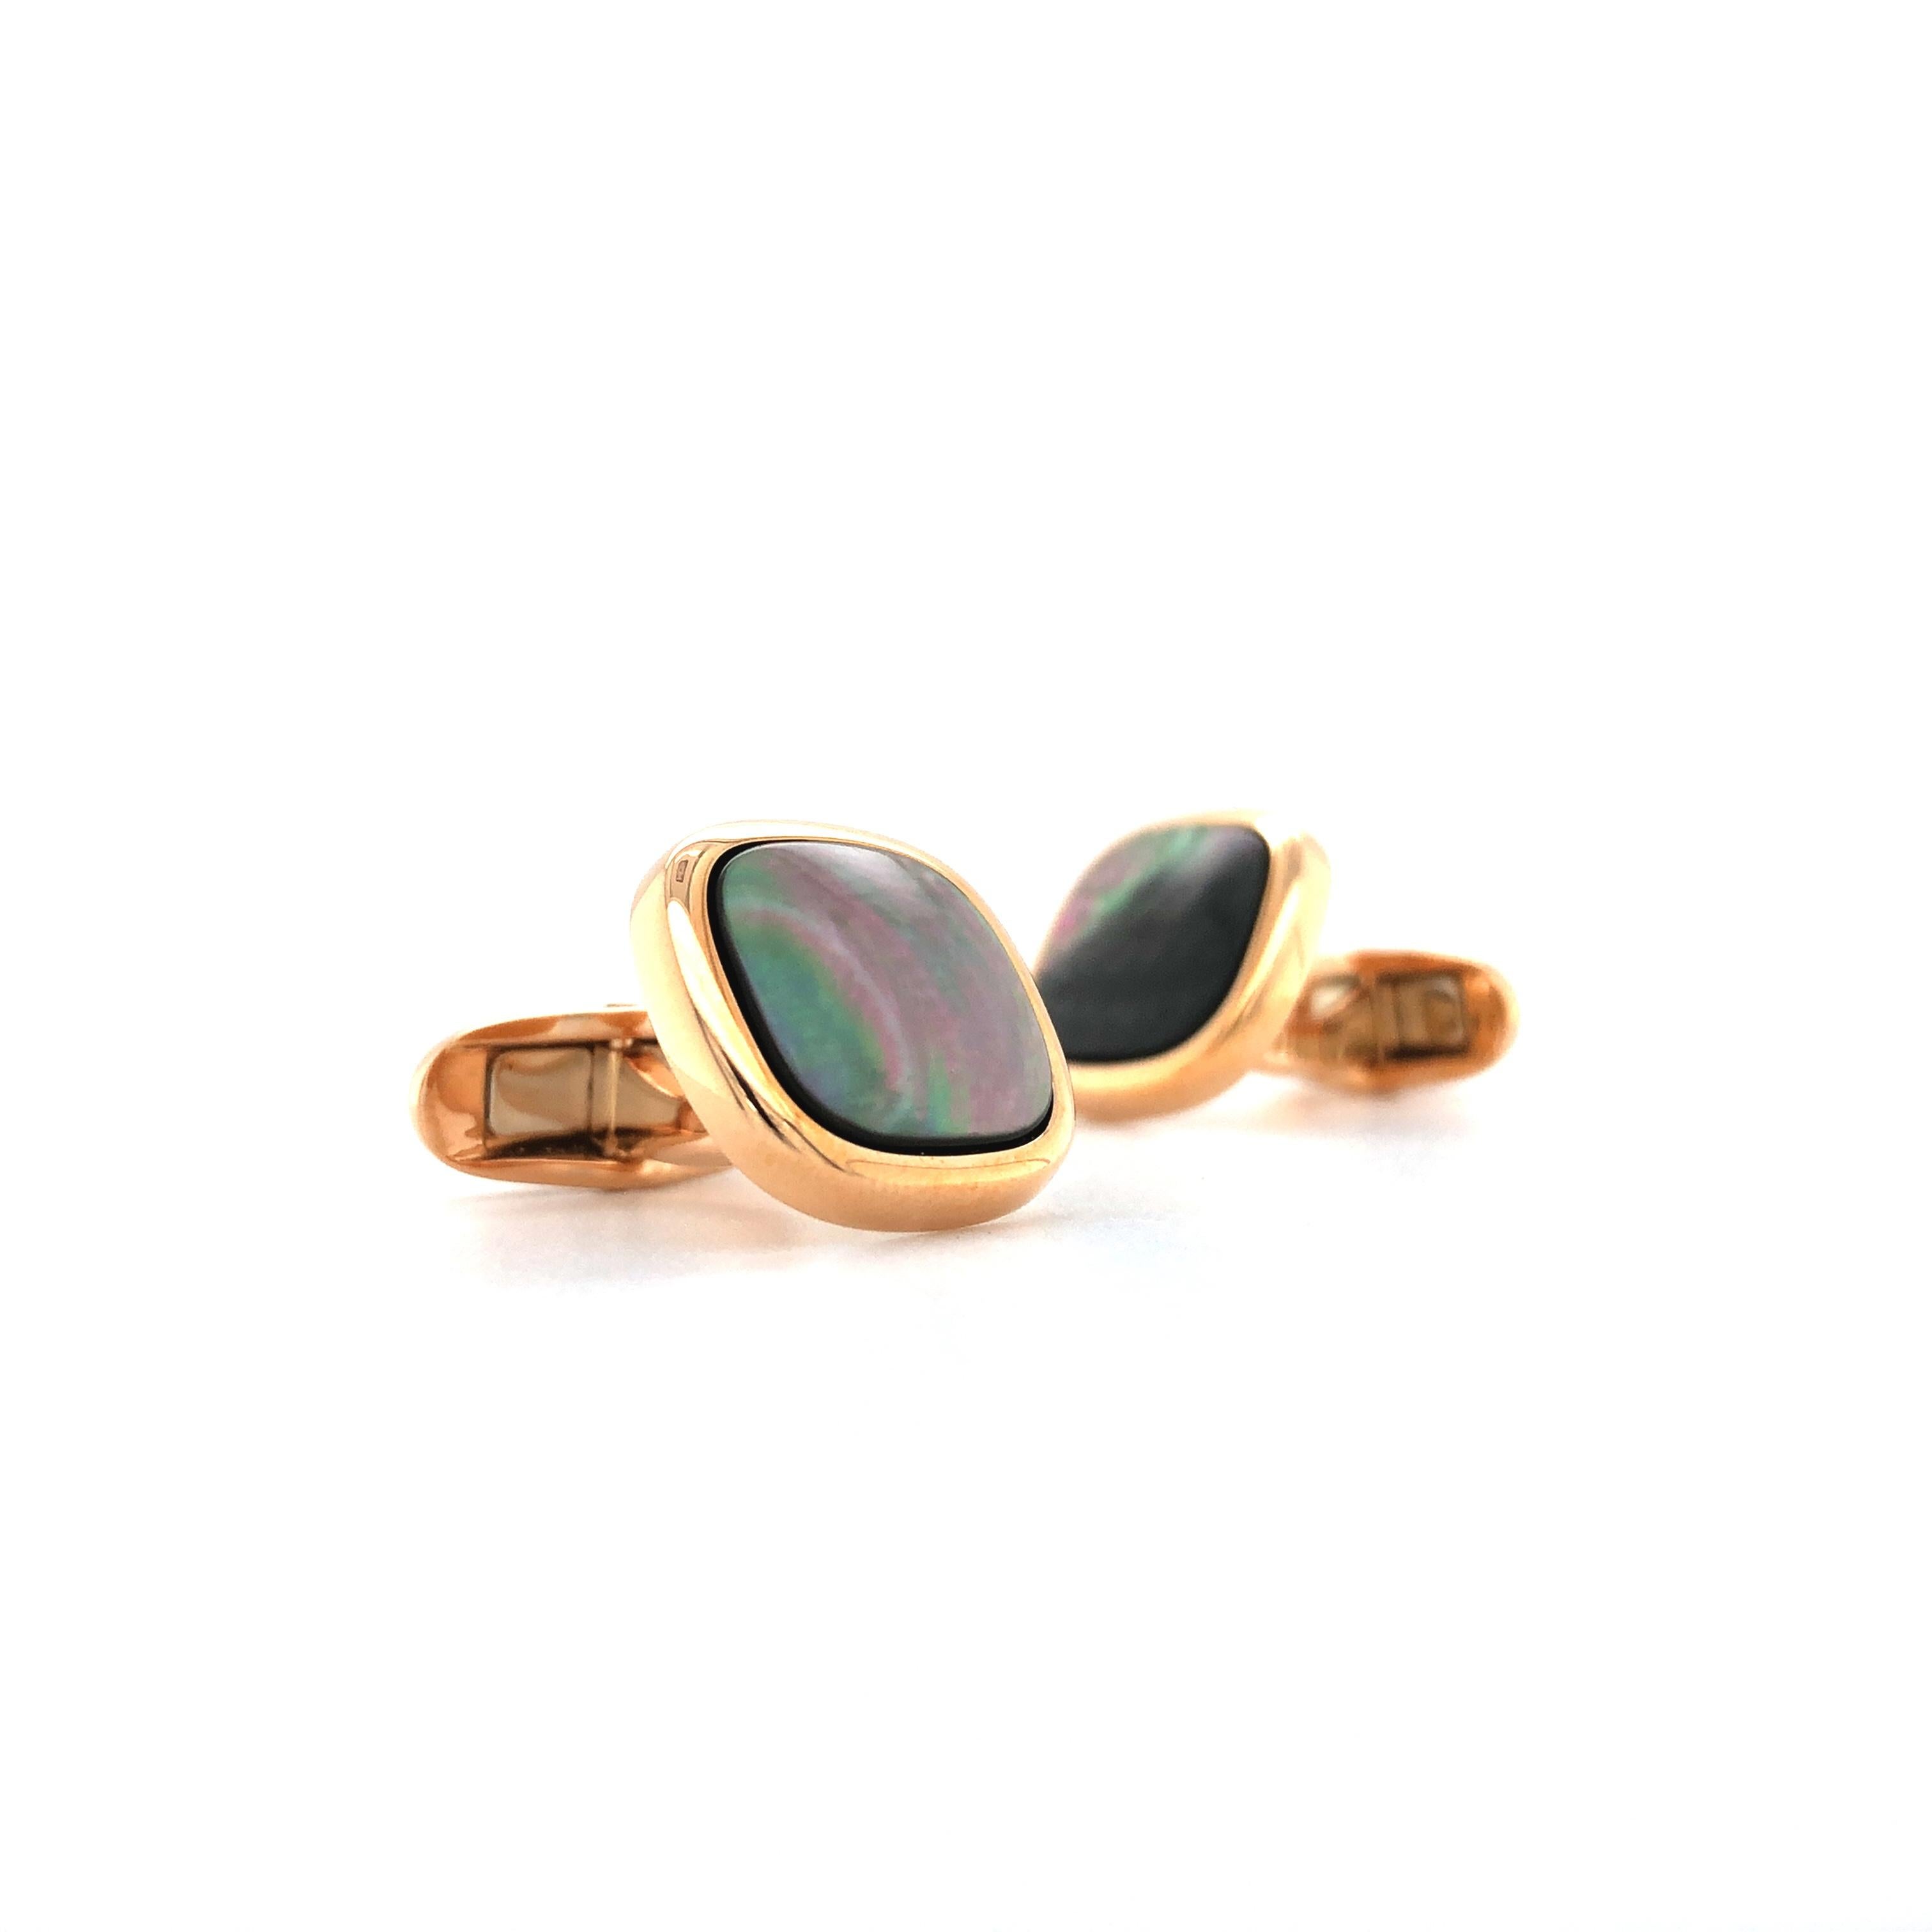 Victor Mayer square cufflinks with rounded contours, Hallmark Collection, 18k rose gold, 2 black mother of pearl inlays

About the creator Victor Mayer
Victor Mayer is internationally renowned for elegant timeless designs and unrivalled expertise in